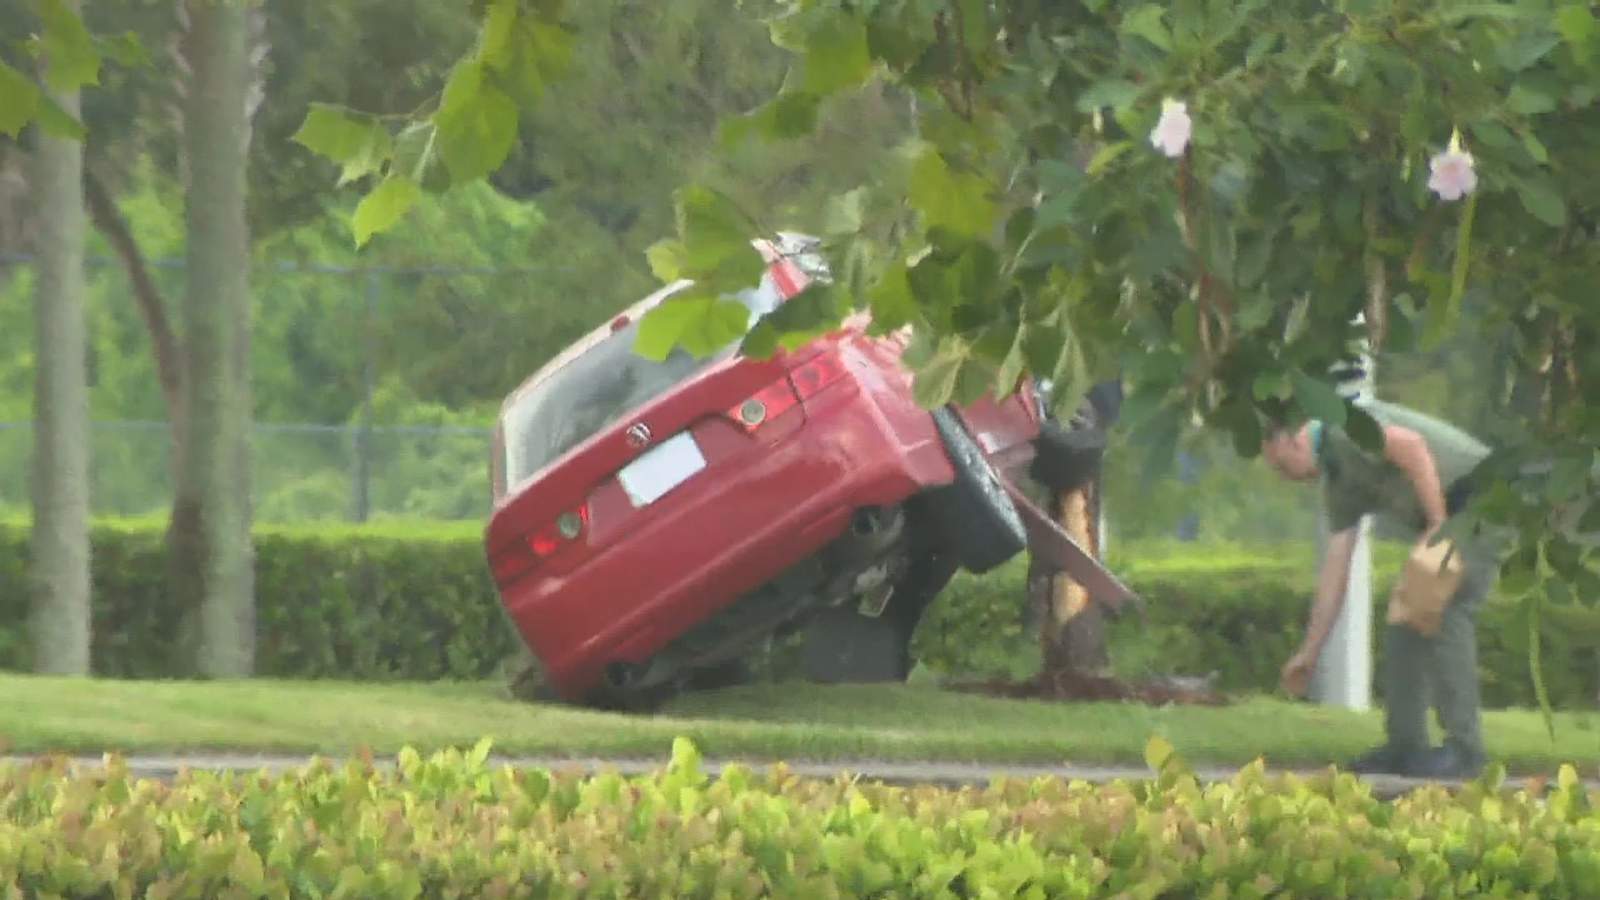 Police in Pompano Beach investigating car found propped up against palm tree